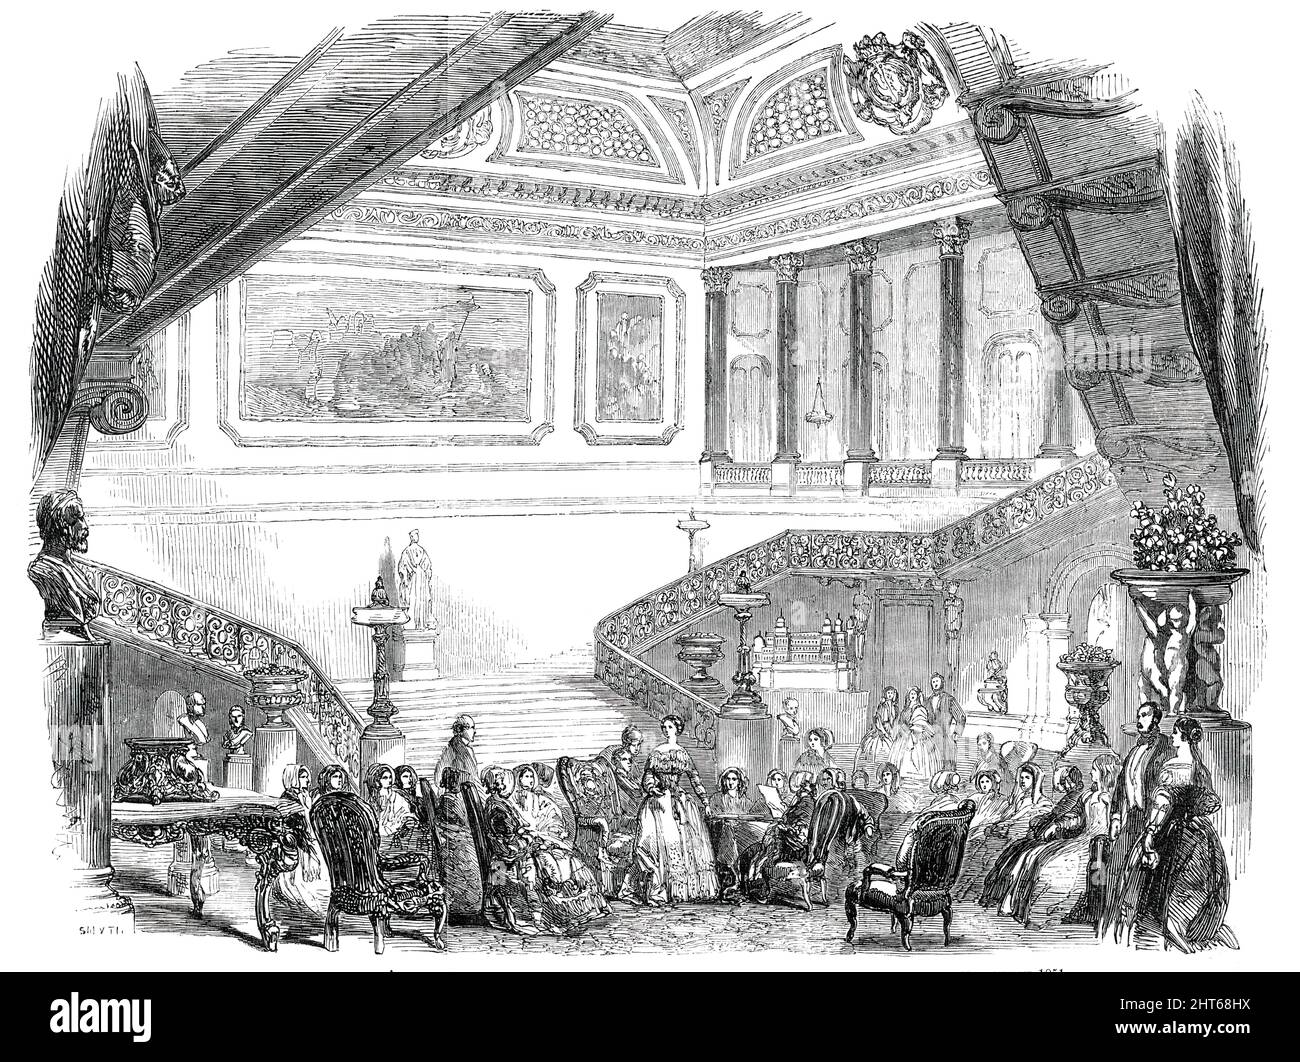 Meeting of the Ladies' Committee at Stafford House in Aid of the Great Exhibition of Industry of all Nations, in 1851, 1850. 'A meeting took place on Saturday last, at Stafford House, where, on the invitation of the Duchess of Sutherland, a very large party of distinguished ladies assembled, in order to determine upon a plan for aiding the Prince Consort in carrying out the great Exhibition of National Industry propounded by his Royal Highness...A number of resolutions were passed, and a committee formed, to which Lord Dufferin and Lord F. Howard were elected honorary secretaries; after which Stock Photo